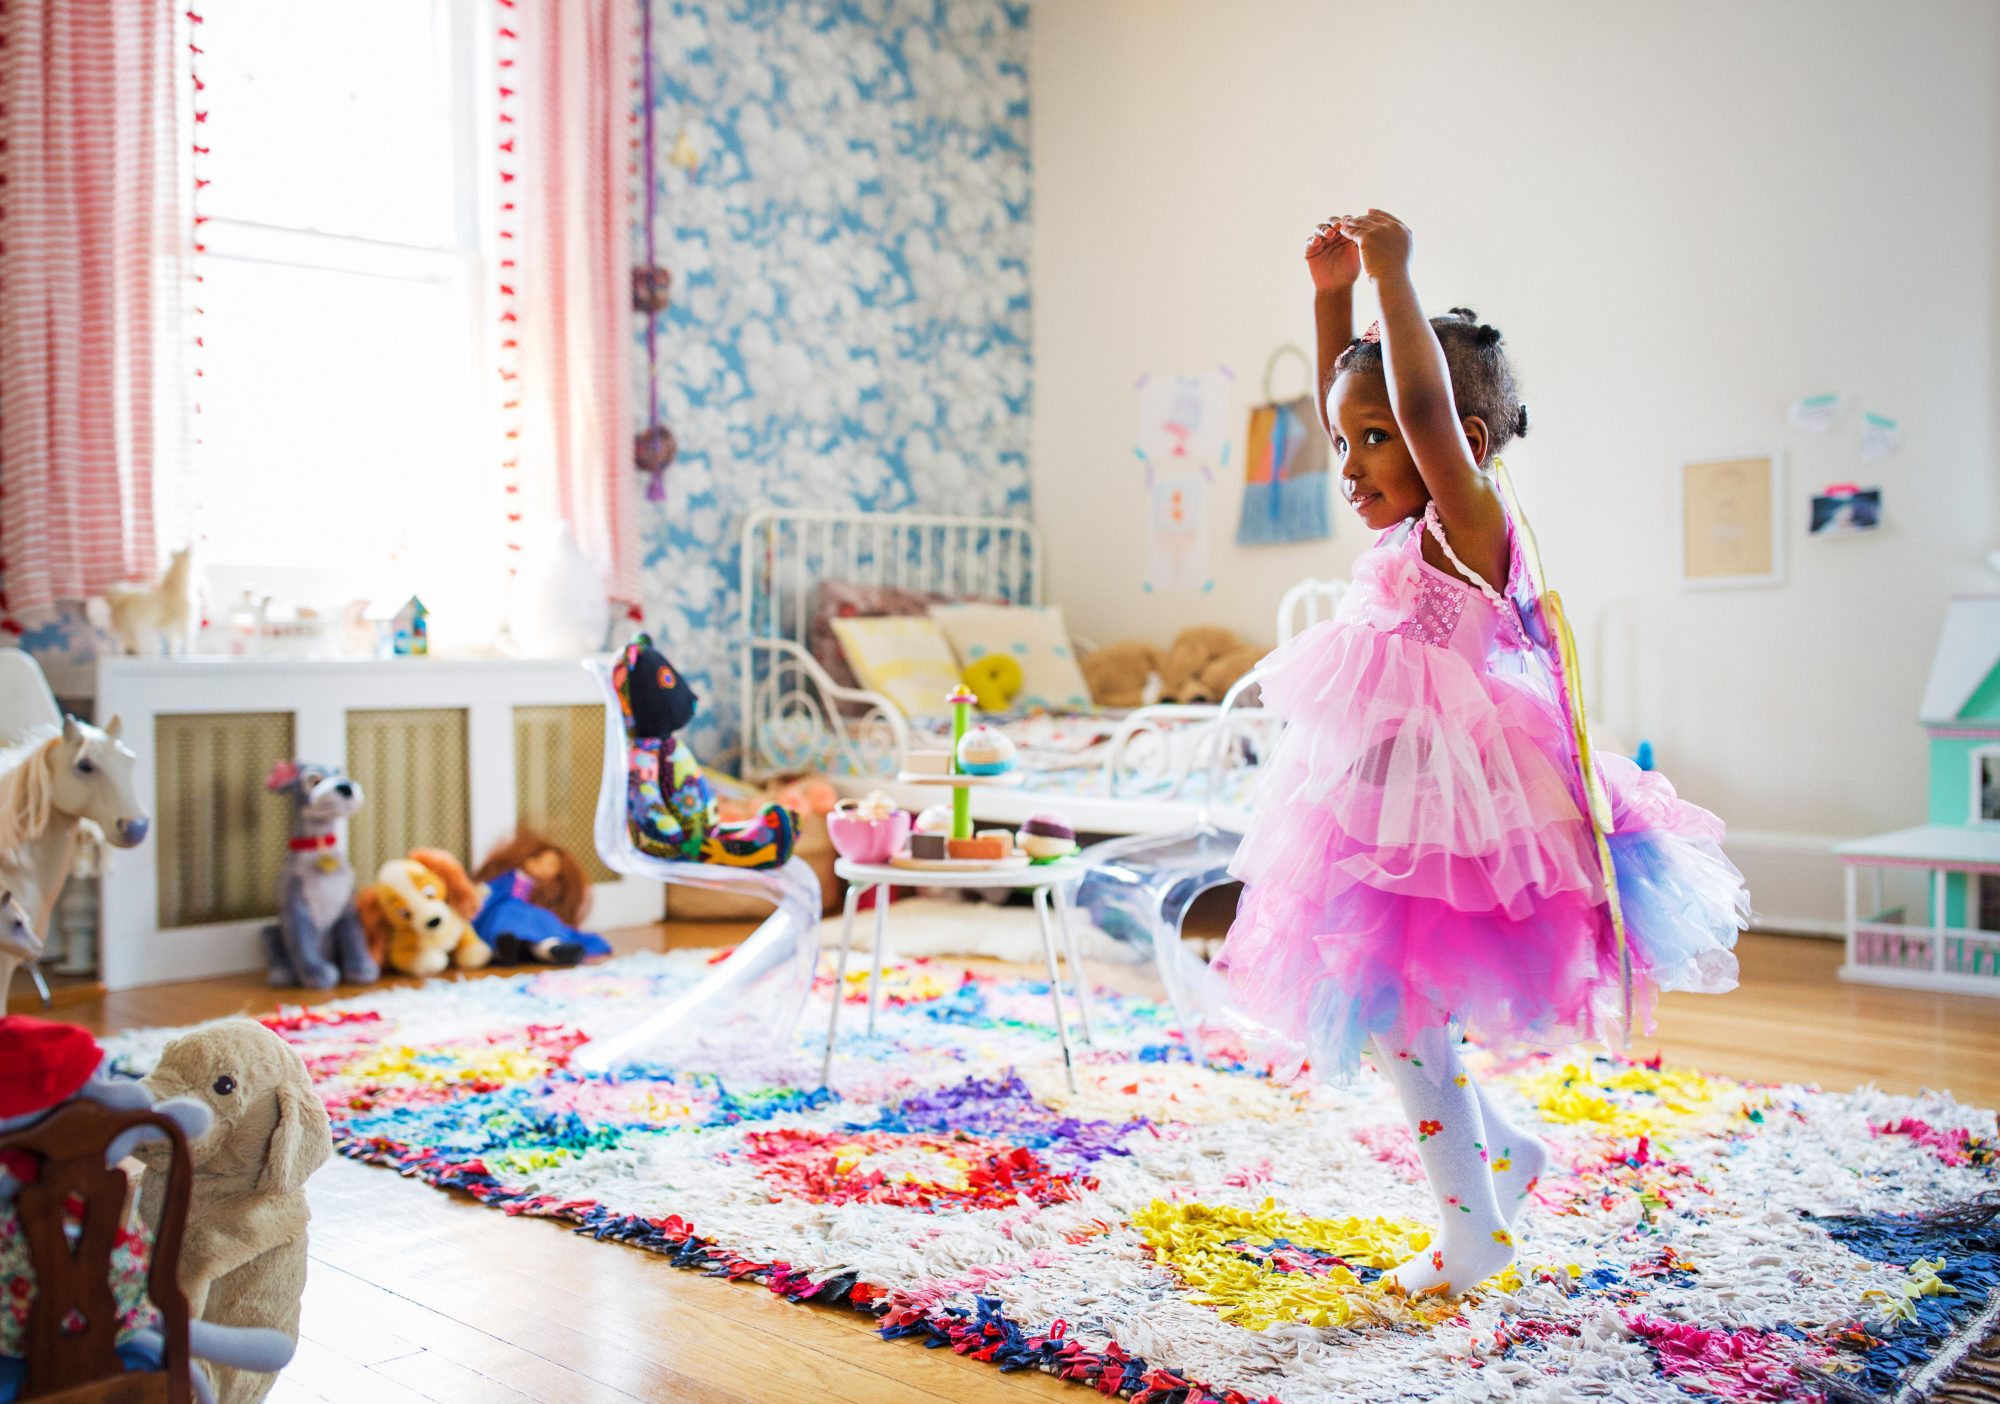 An image of a little girl dancing in her room.